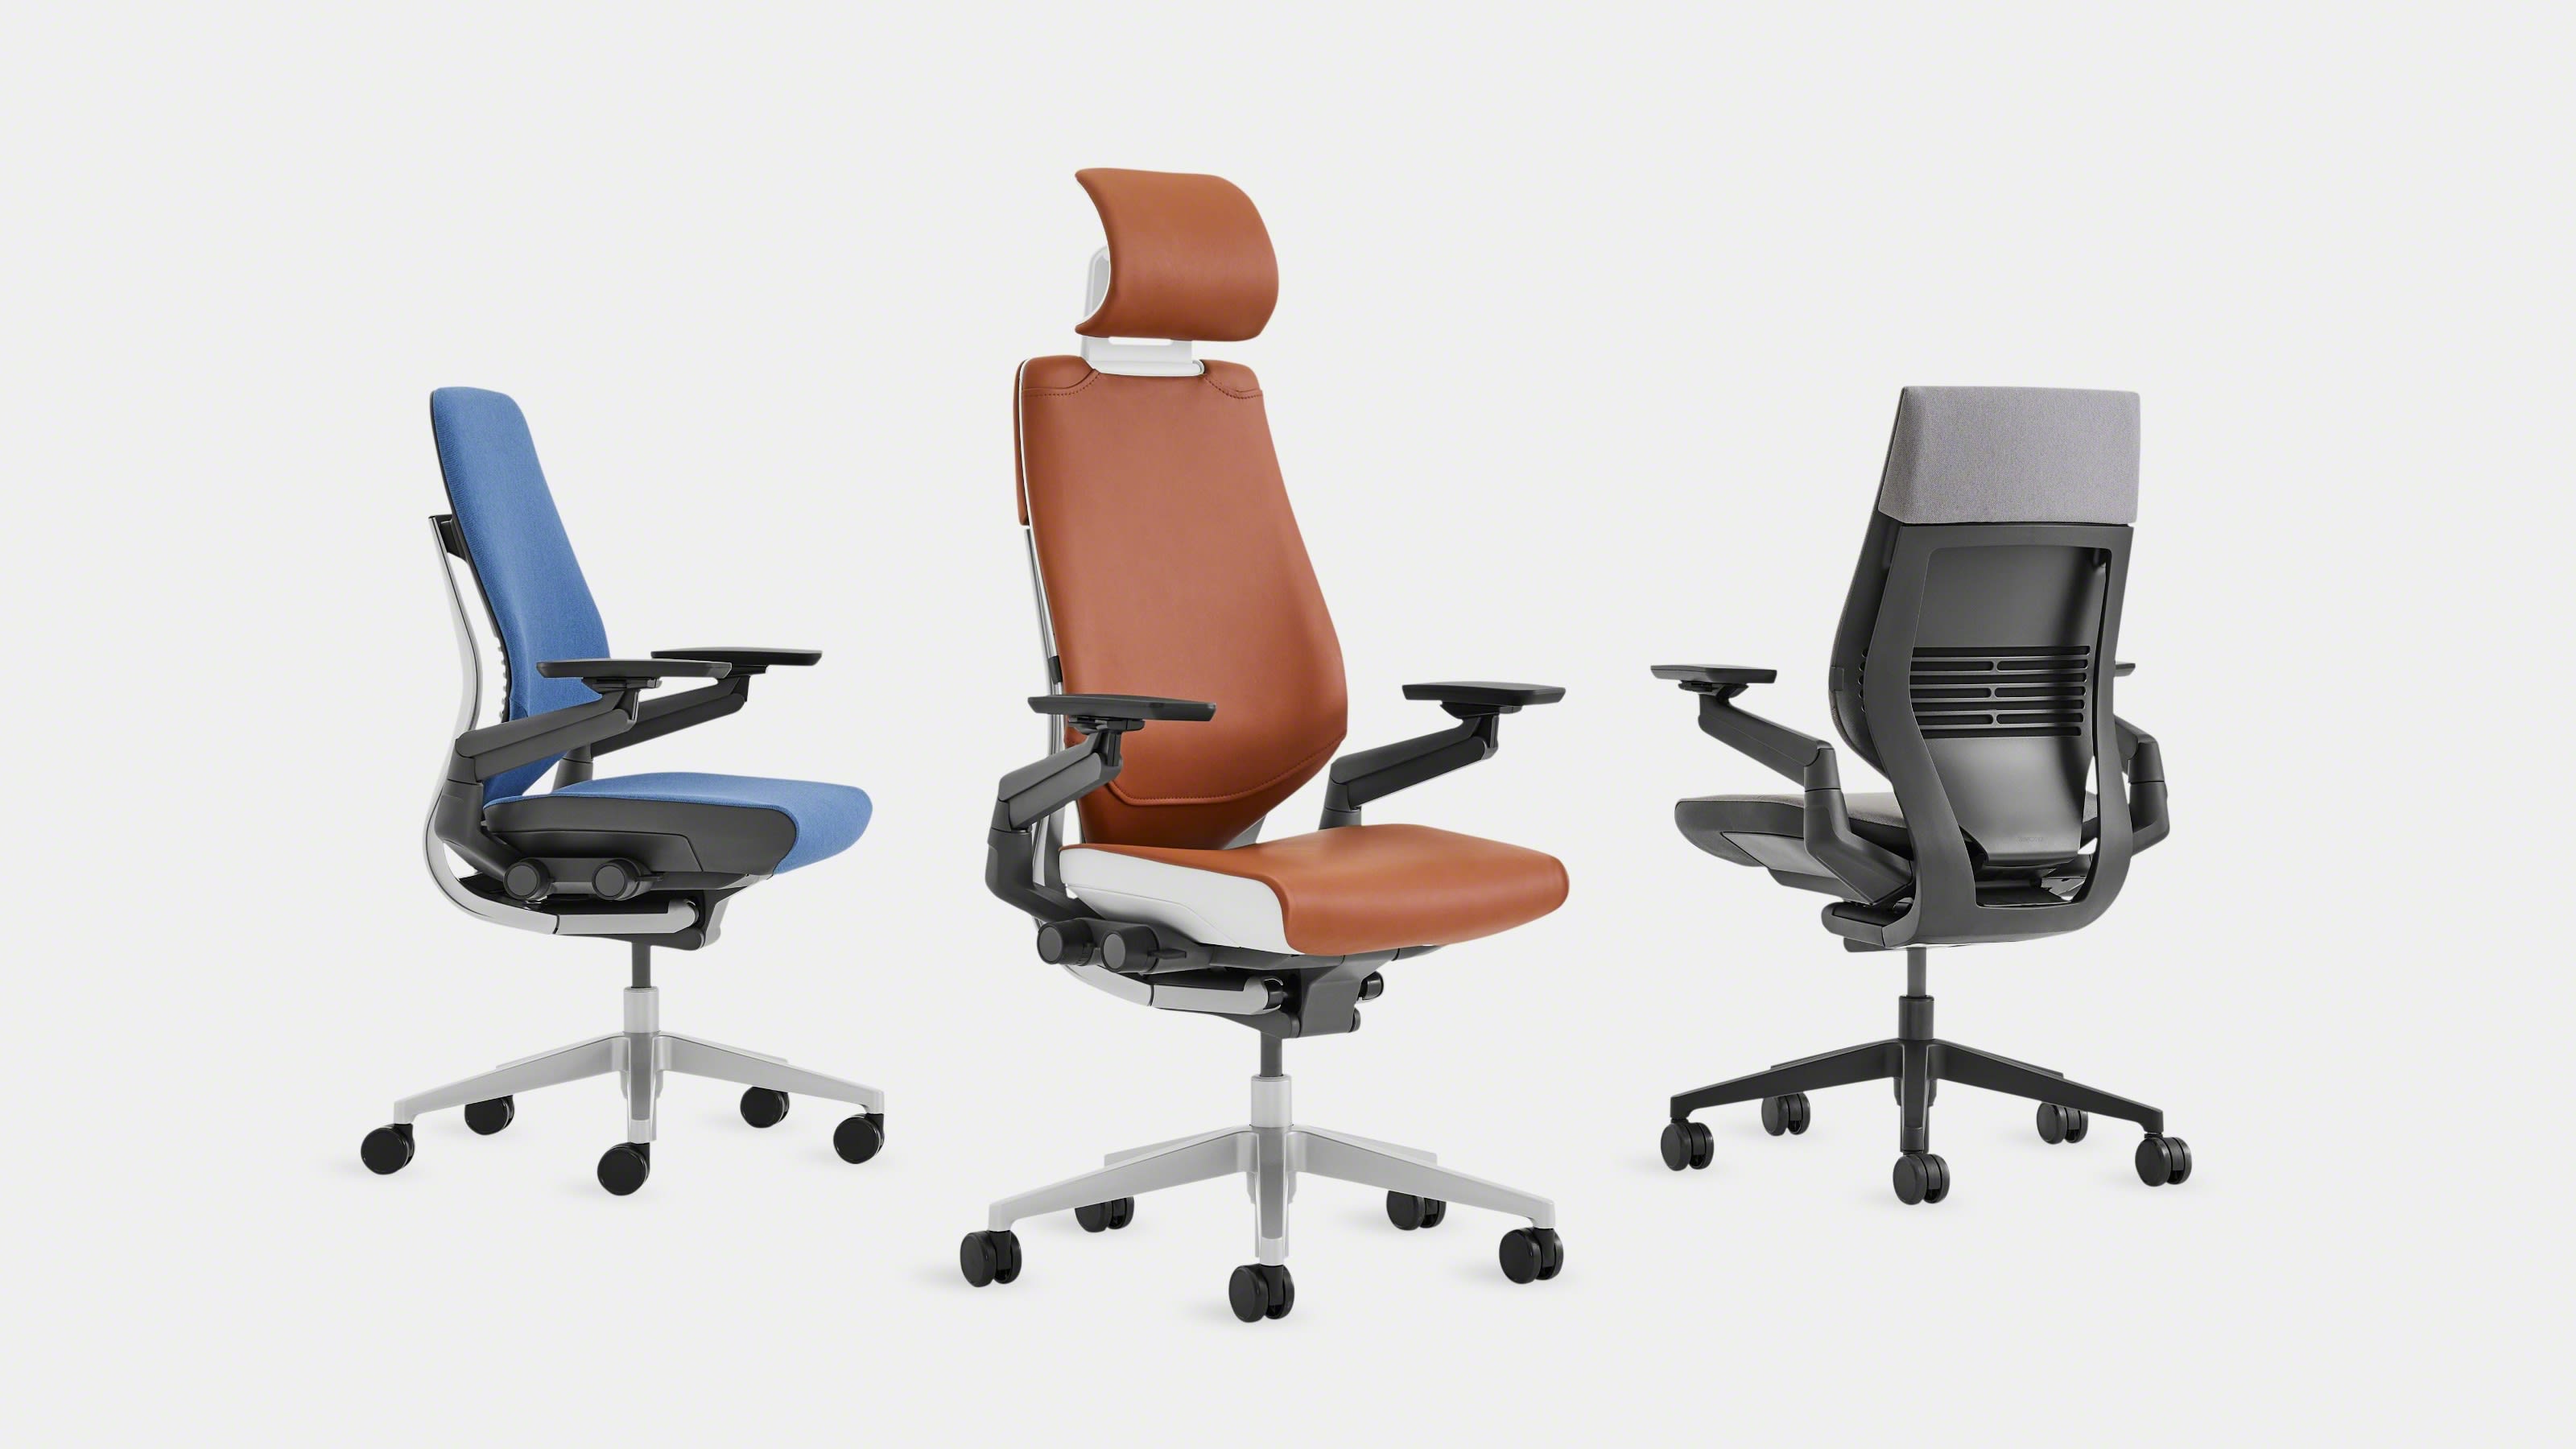 Steelcase Steelcase Gesture office home Chair good condition 10 stock FREE DELIVERY 